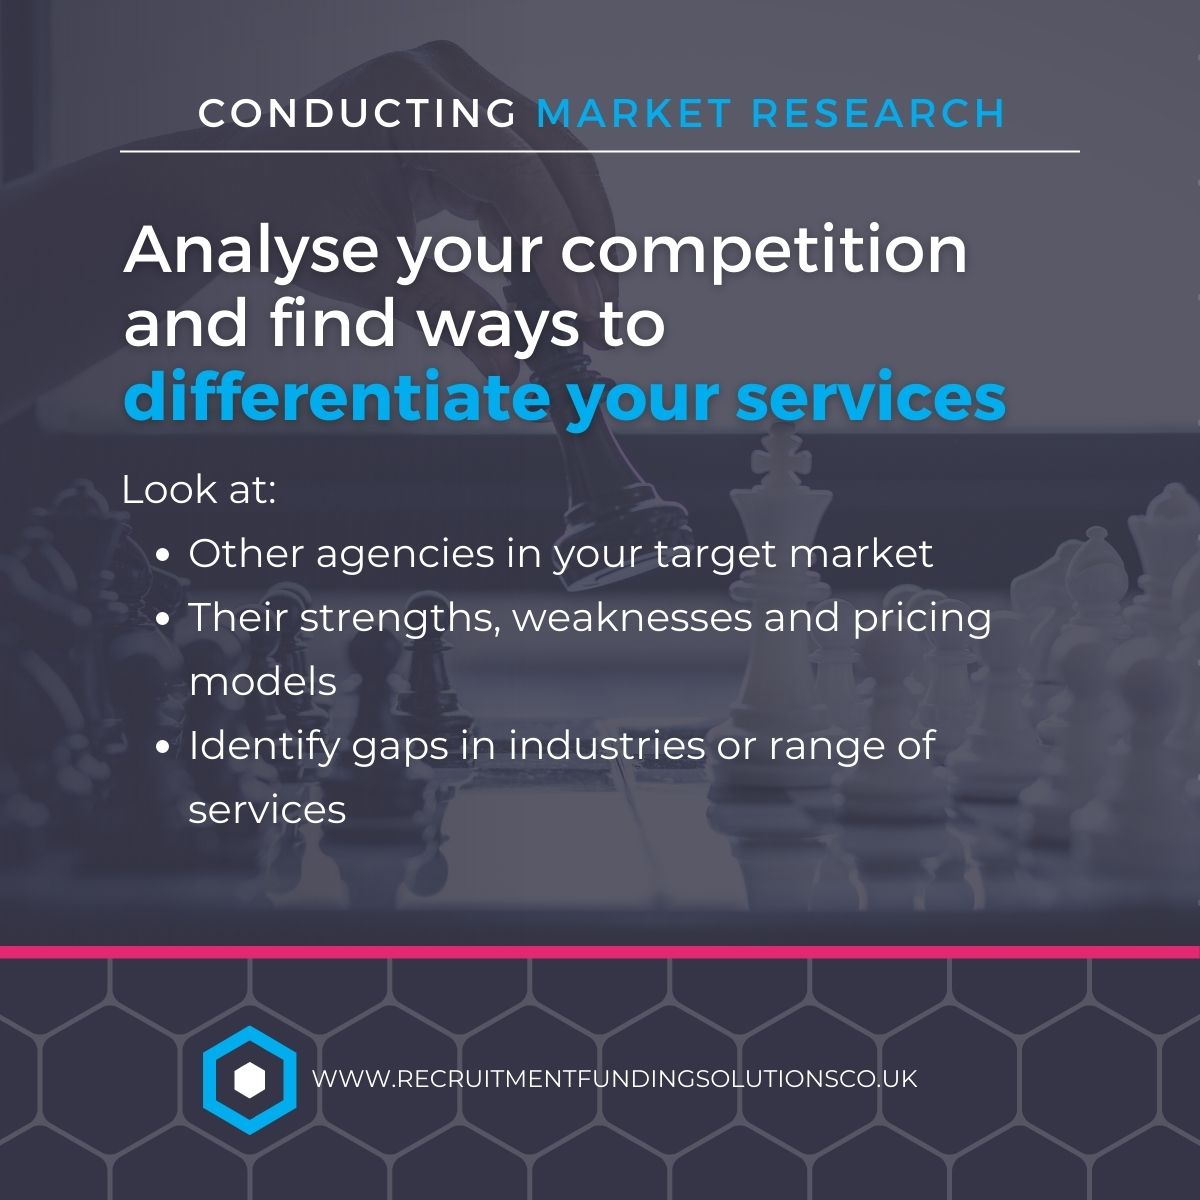 Conducting market research for your recruitment agency - analyse competitors